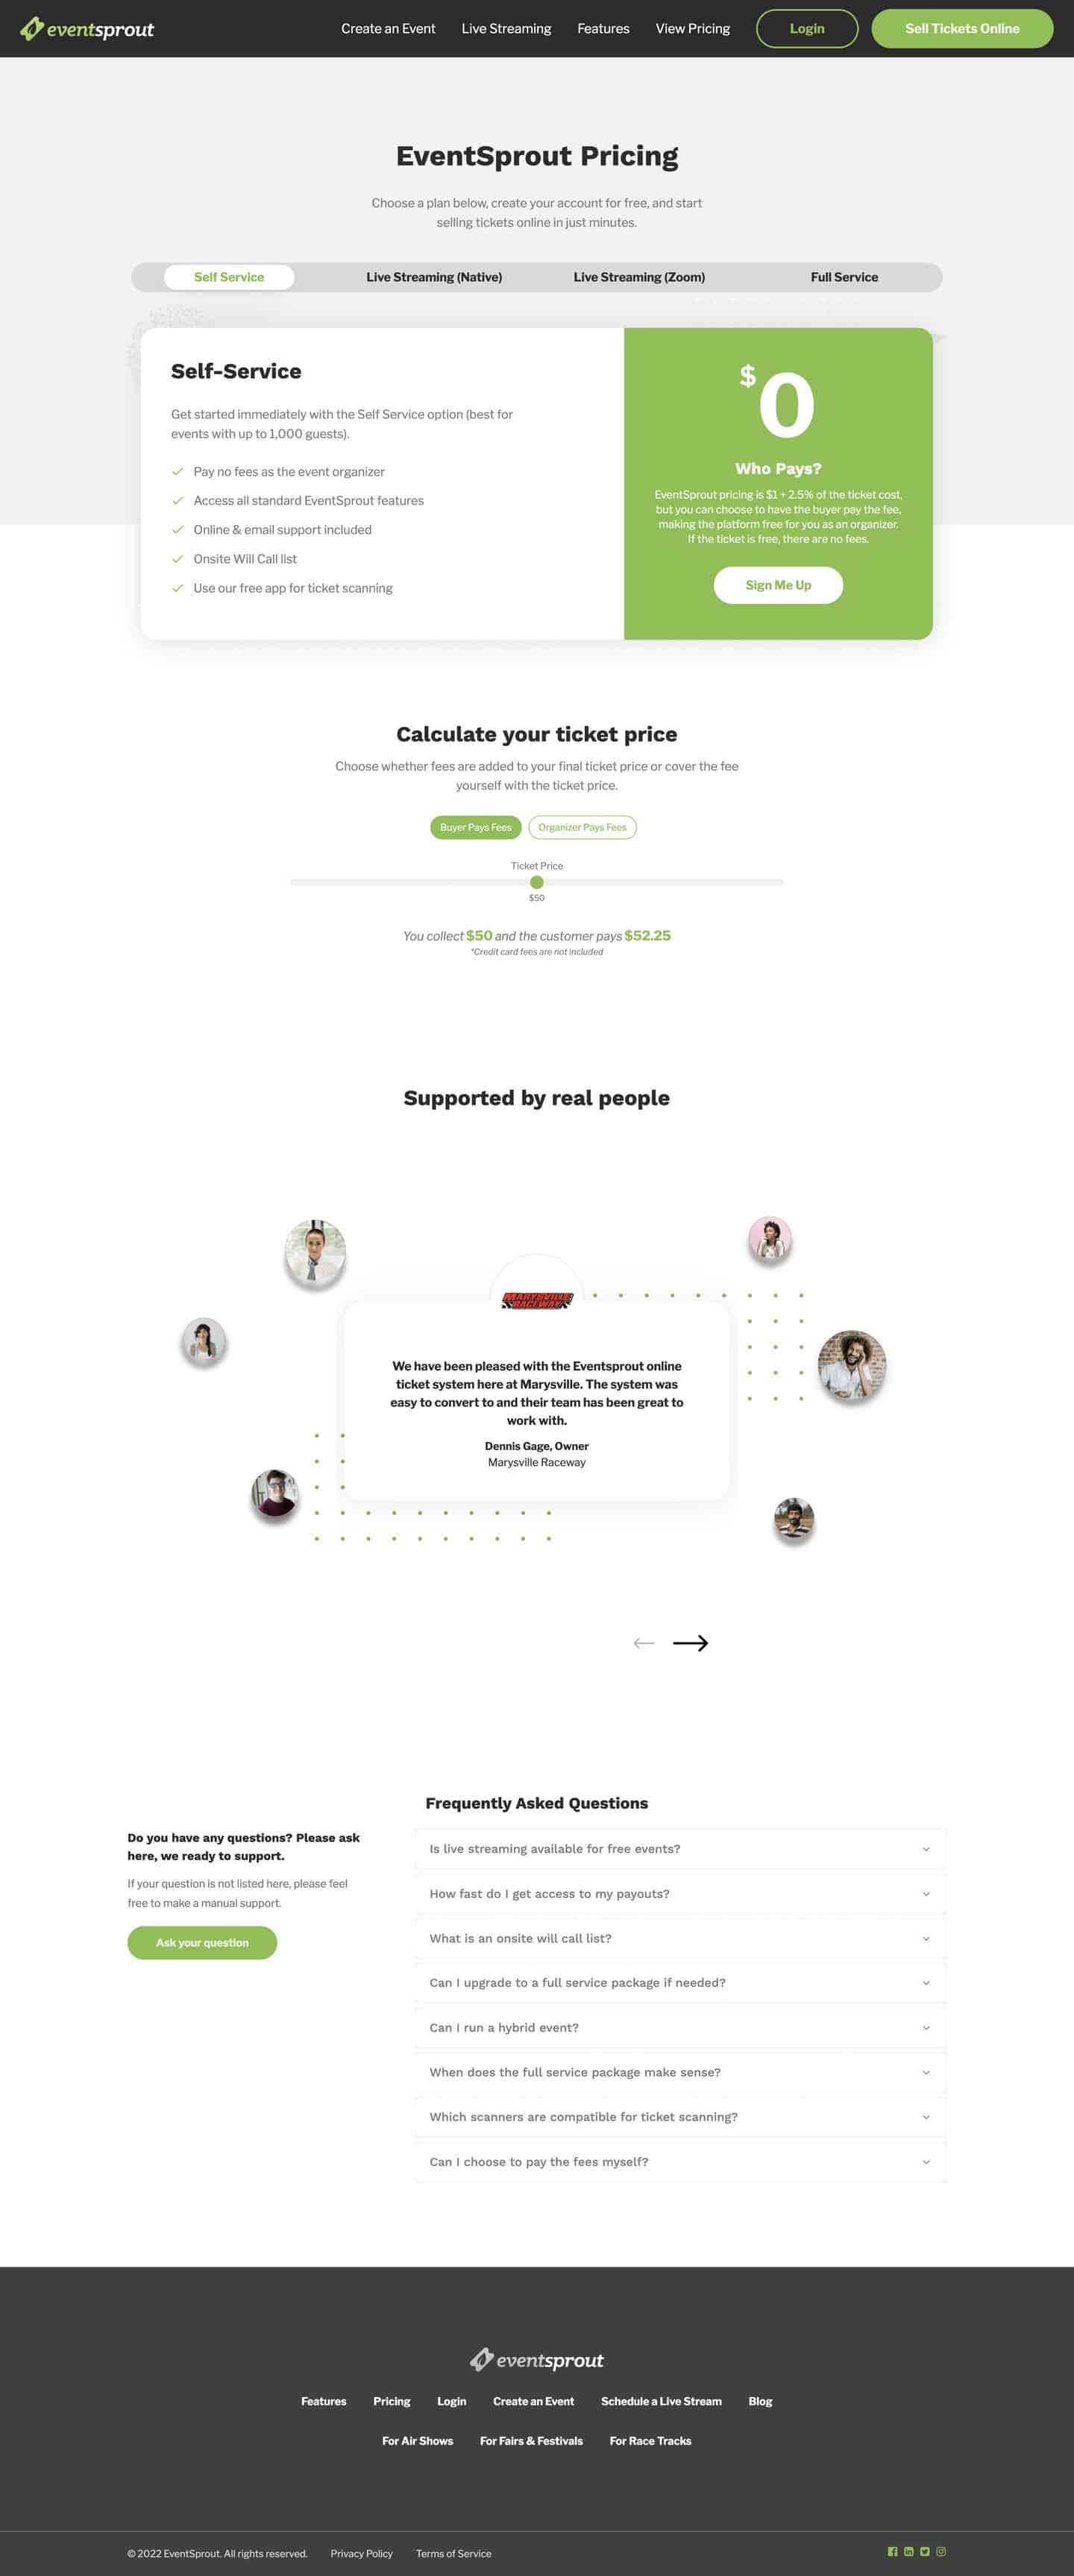 EventSprout Pricing Page Web Design